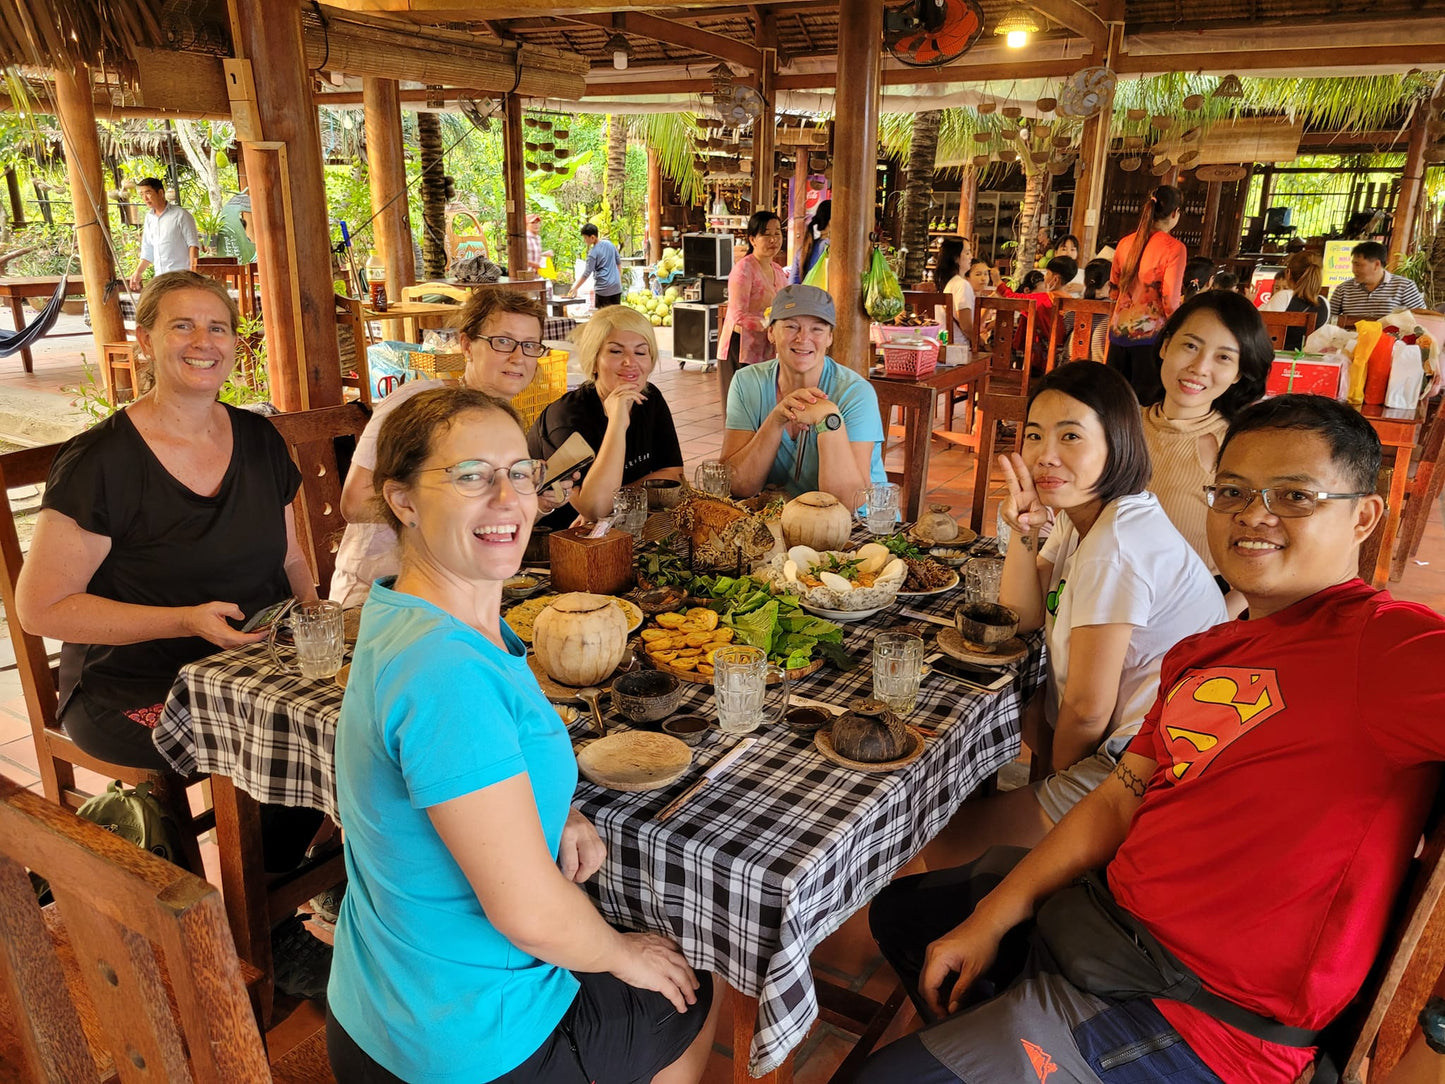 35B: (2 DAYS) Mekong Delta: Pottery Village, Floating Markets, Can Tho, Islands and Boat Tour!